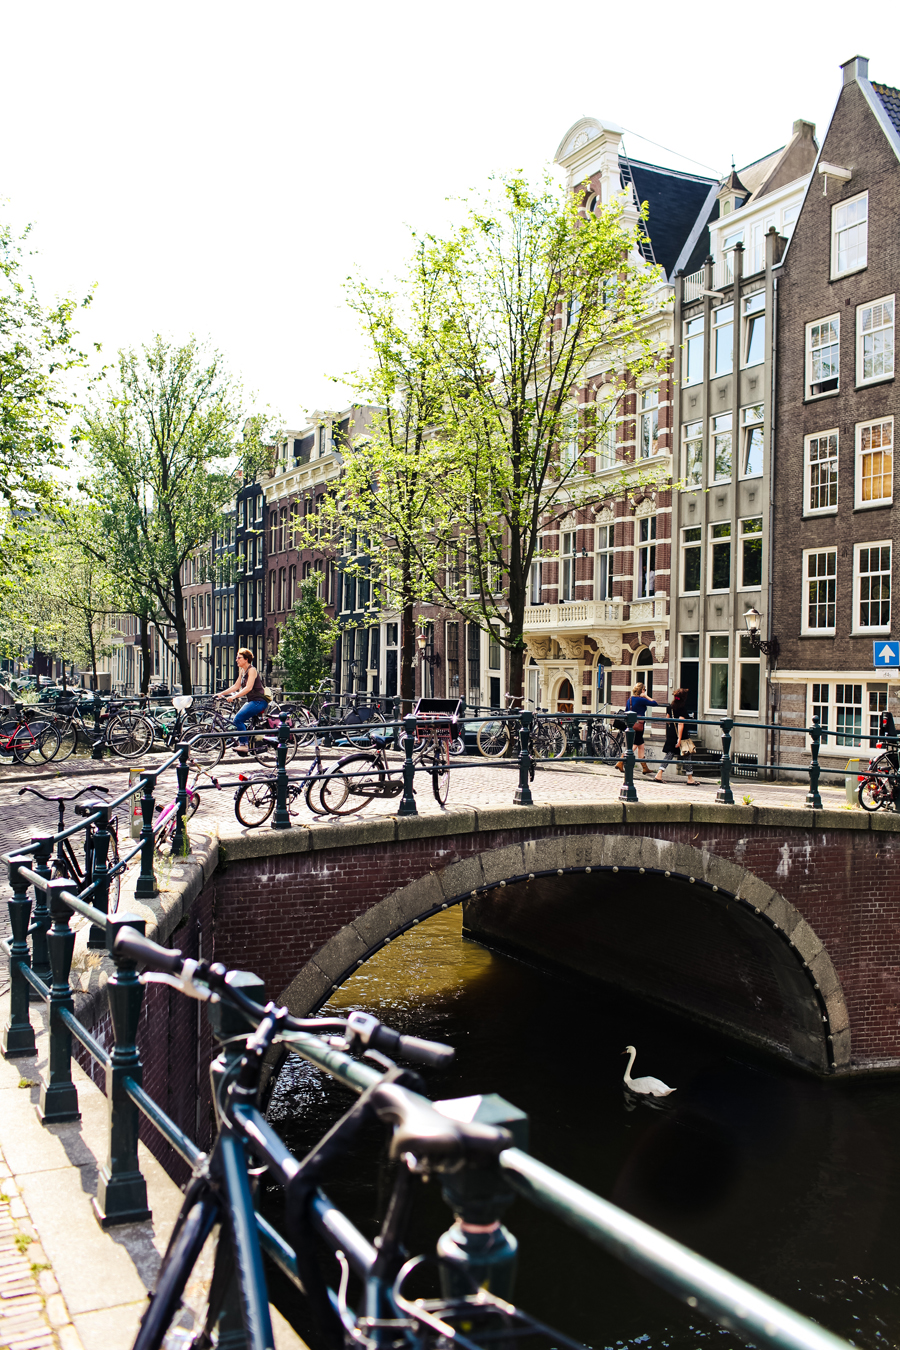 Bicycles and Waterways of Amsterdam